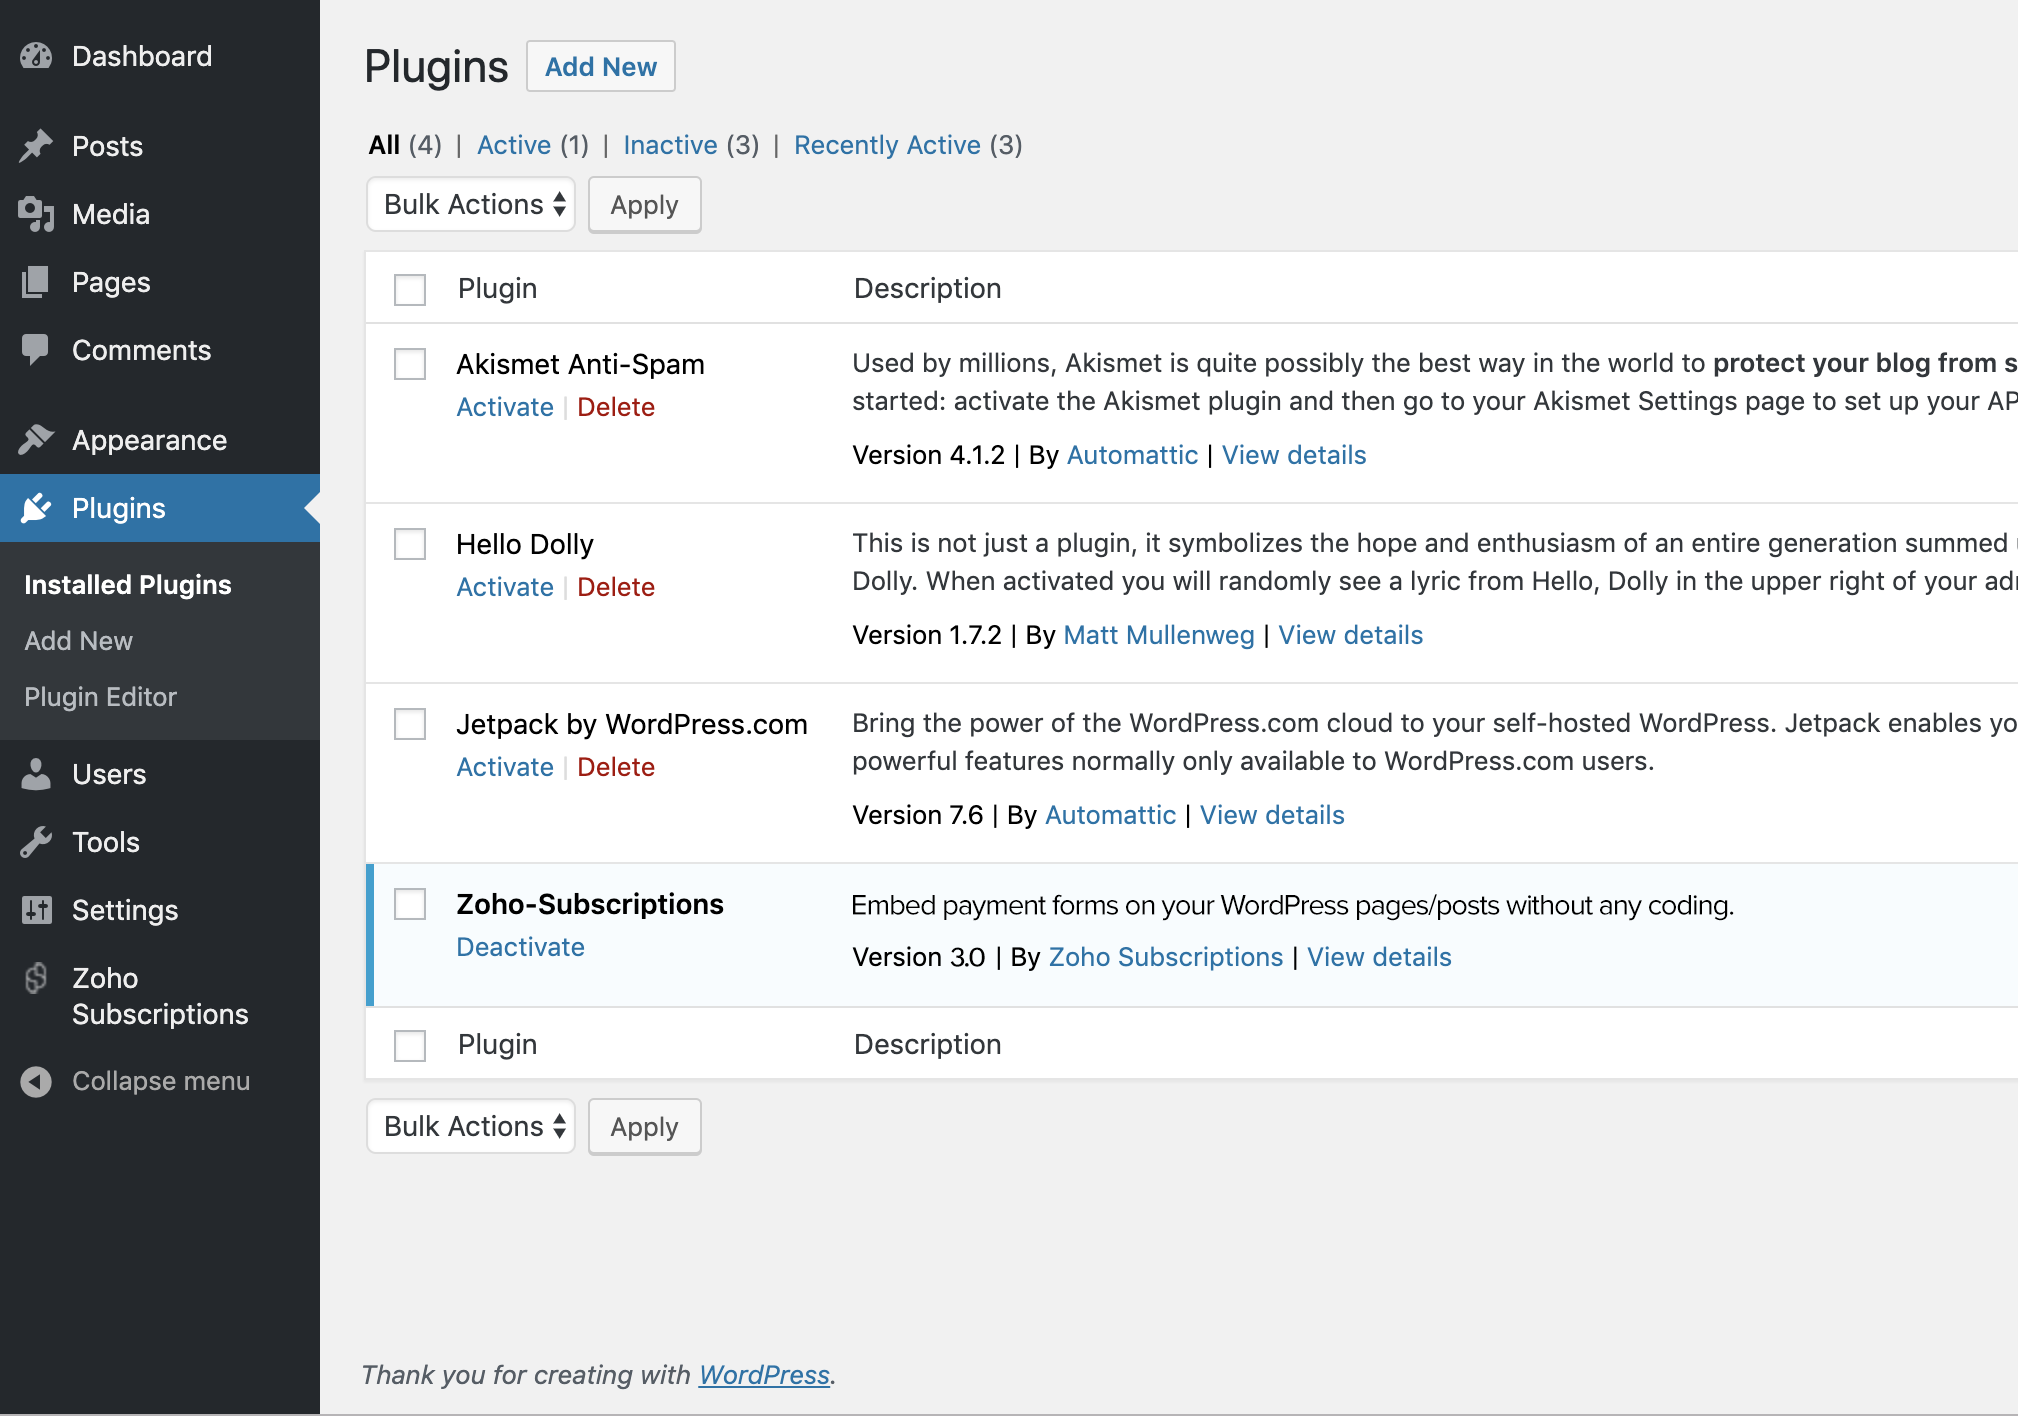 Zoho Subscriptions plugin displayed in the WordPress plugins list